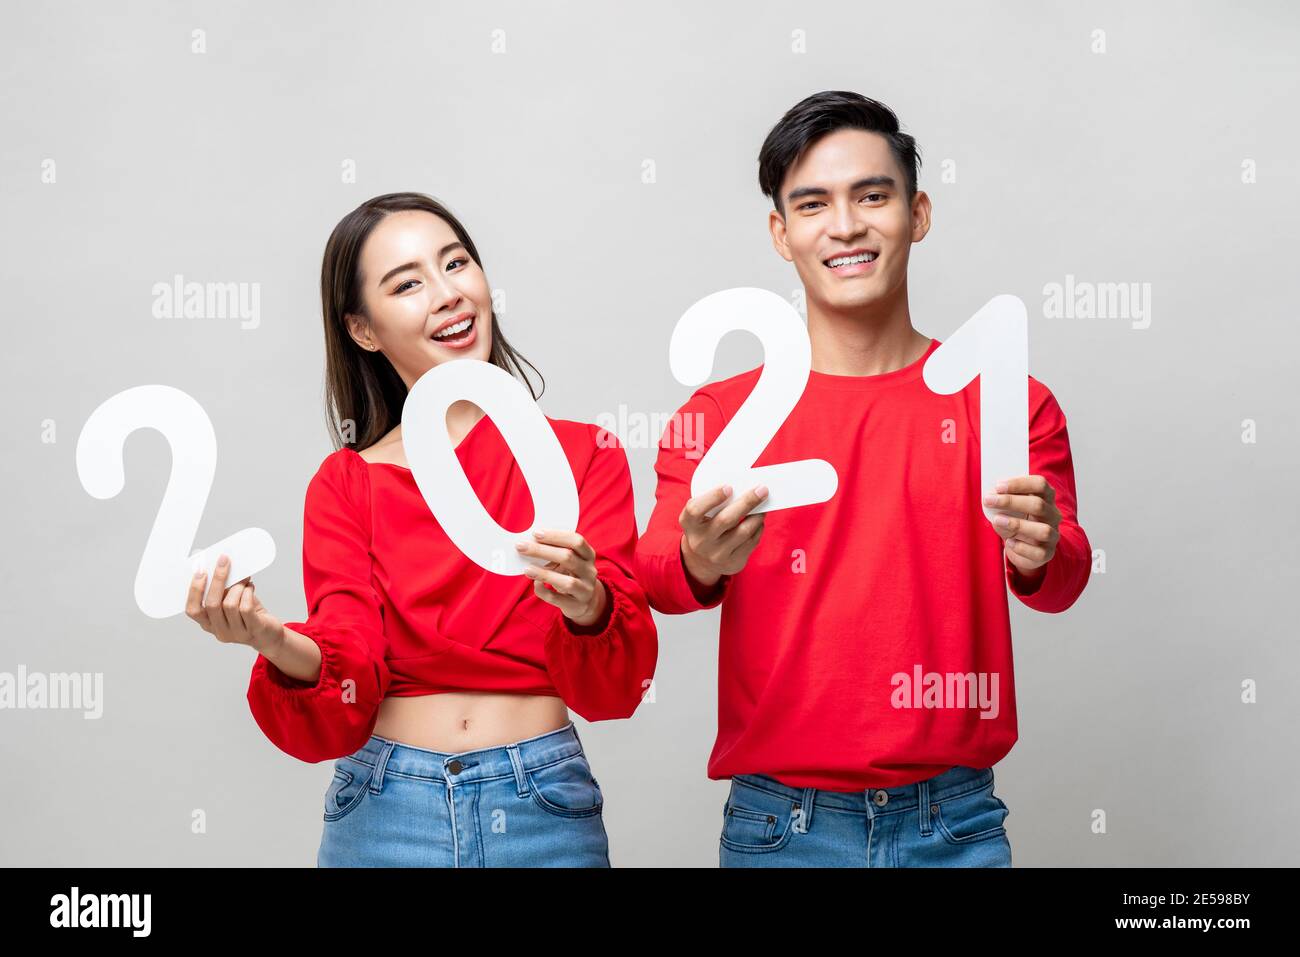 Smiling happy Asian couple and showing number 2021 for new year concept on light gray studio background Stock Photo